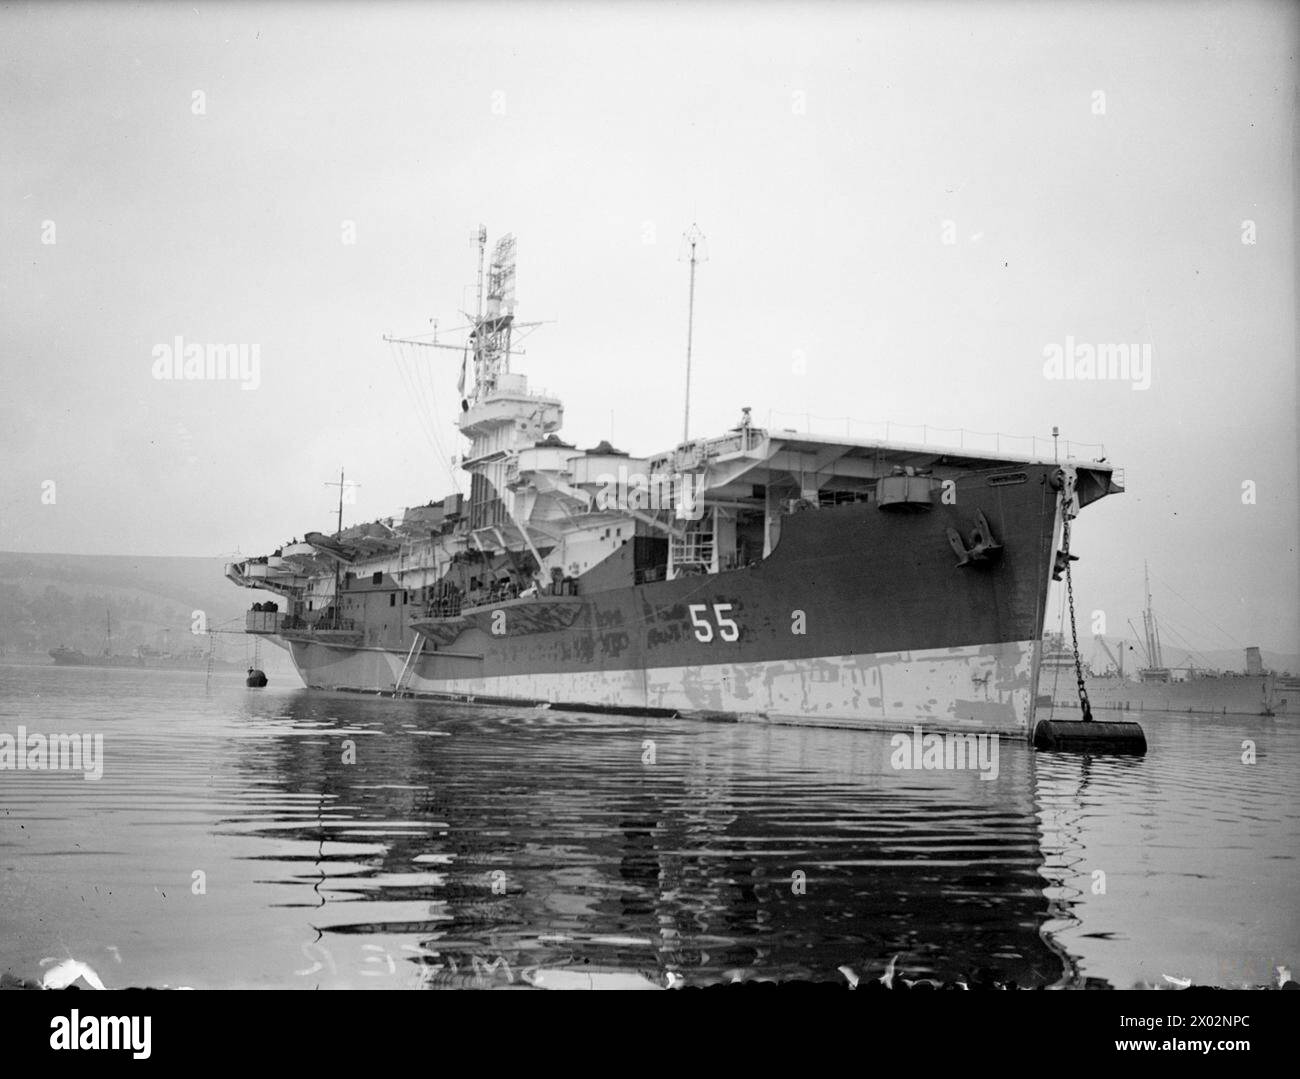 HMS SMITER, ESCORT CARRIER. 29 JULY 1944, GREENOCK. - A three quarter view looking on the port side from the stern Stock Photo